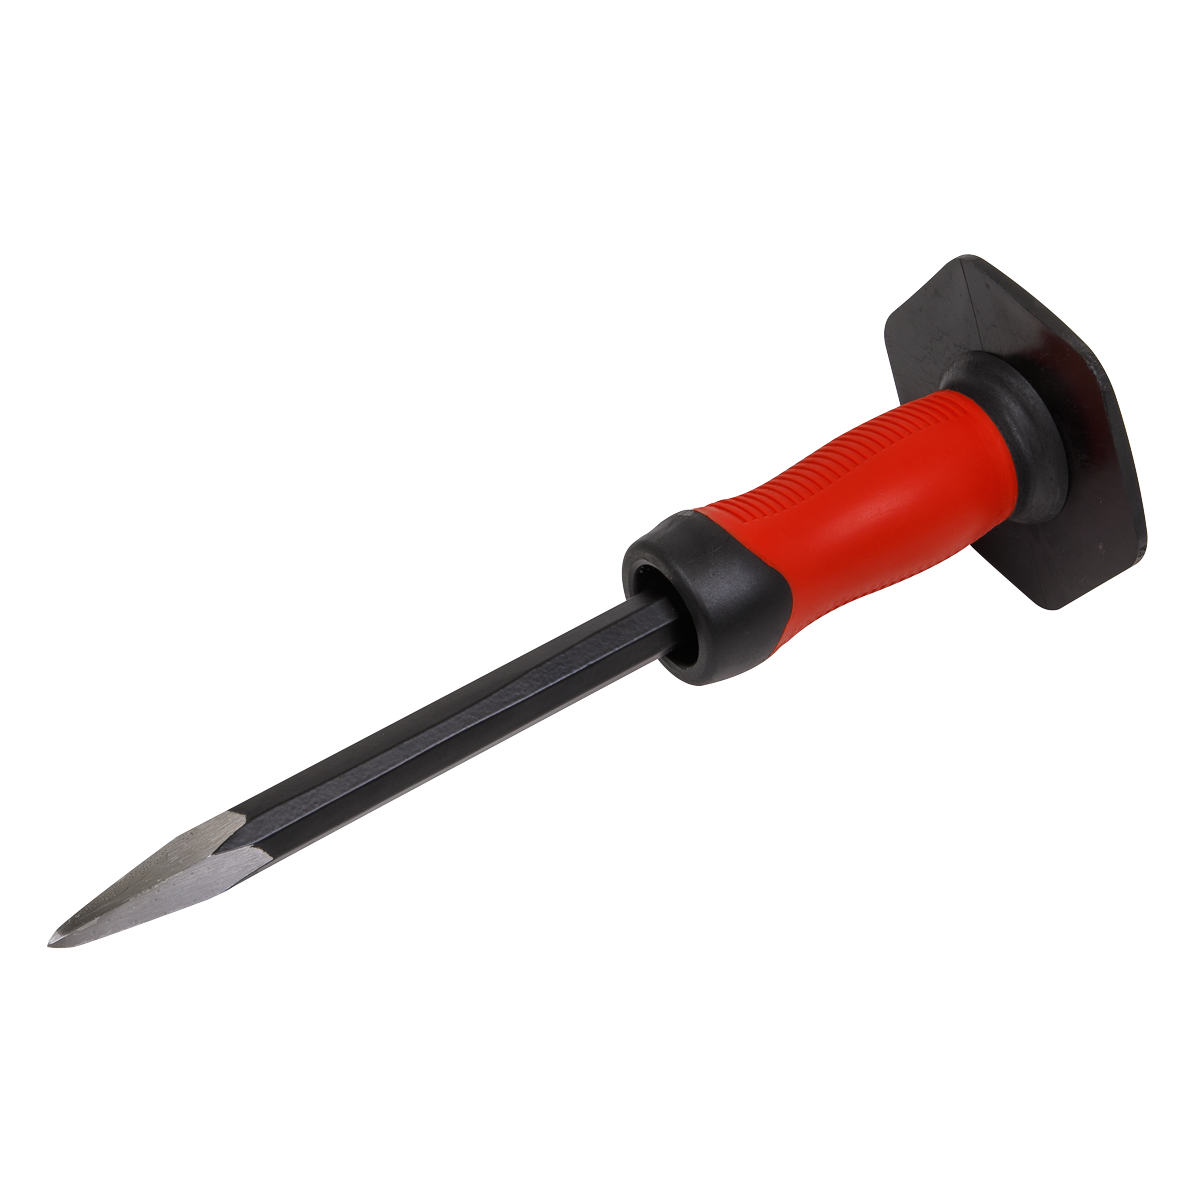 Point Chisel with Grip 300mm - PTC01G - Farming Parts